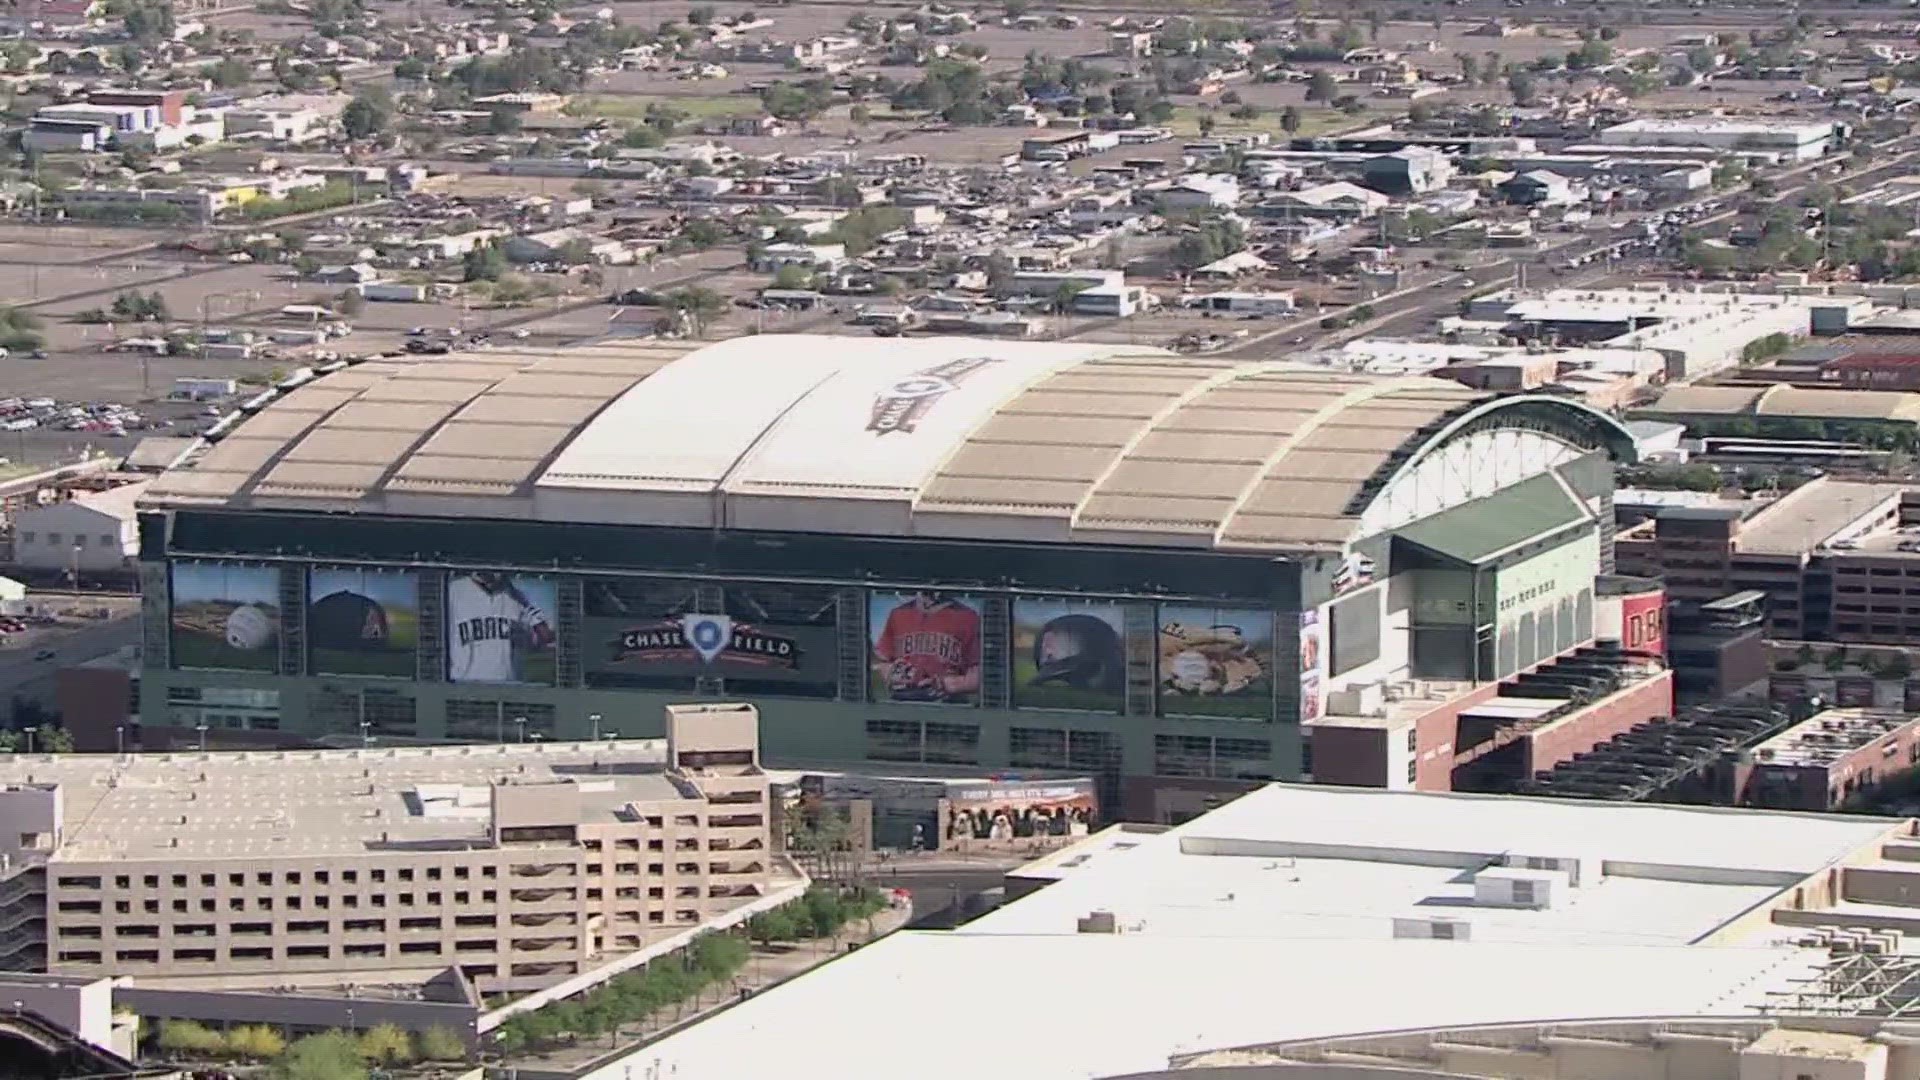 Owner Ken Kendrick spoke to the media this week about the state of the Diamondbacks home.